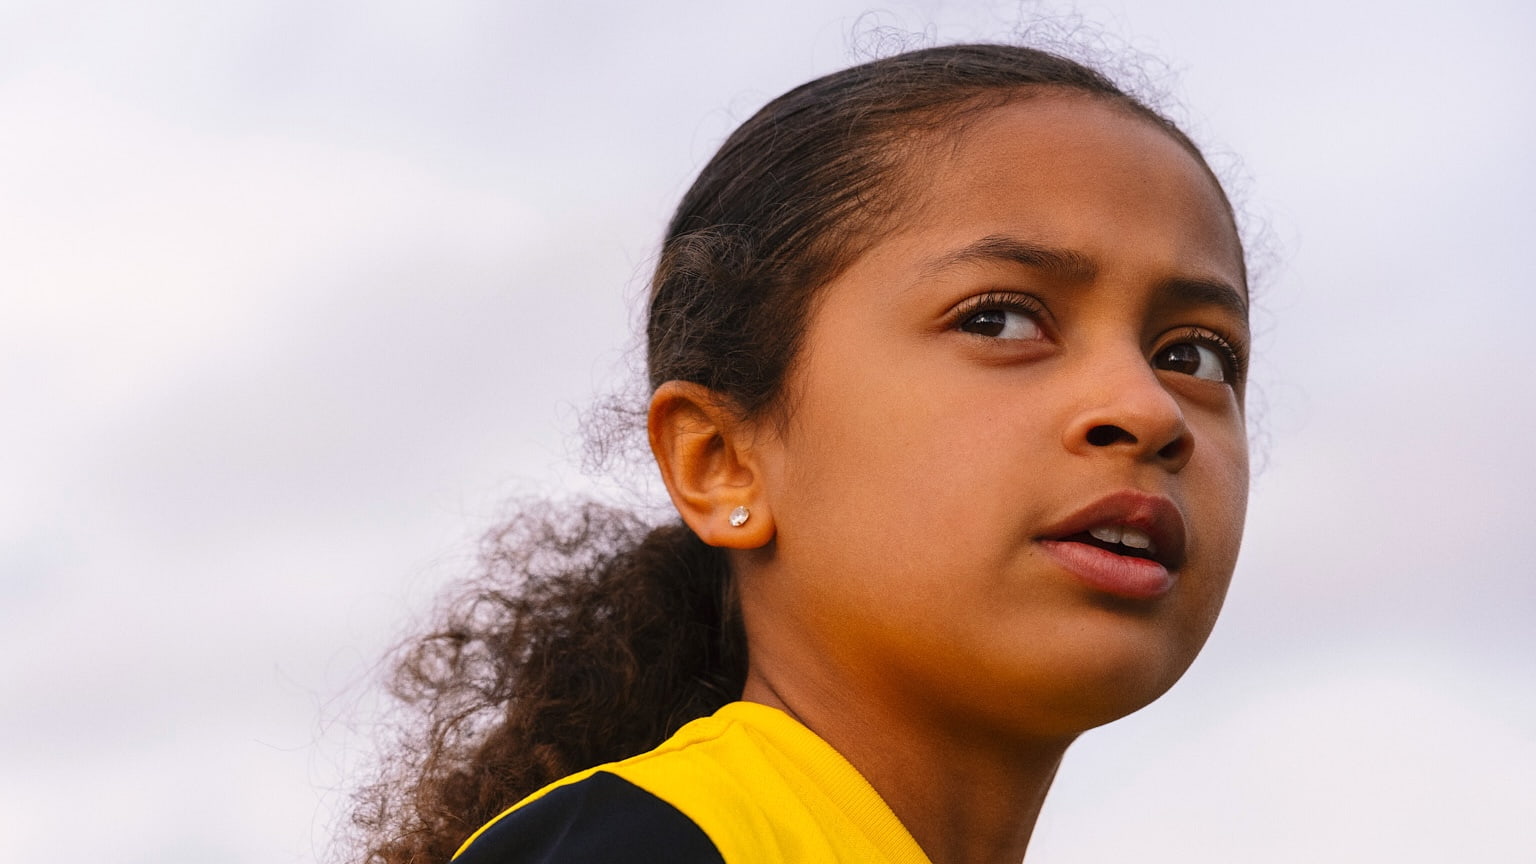 Close up image of the girl during her football training